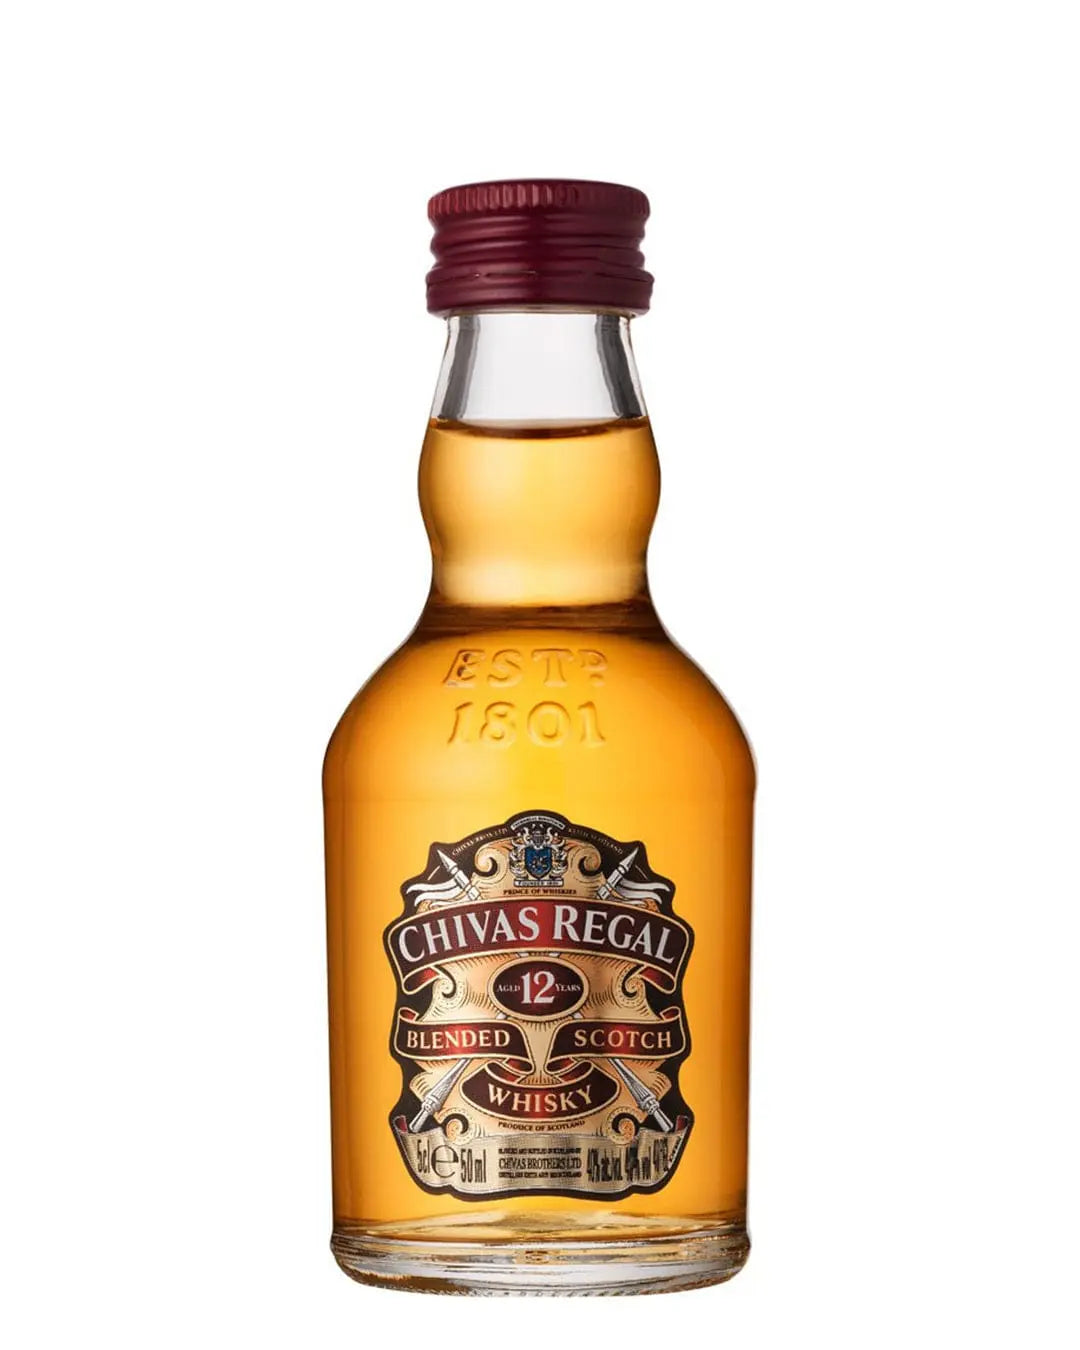 Chivas Regal 12 Year Old Blended Scotch Whisky Miniature, 5 cl Spirit Miniatures 80432400340